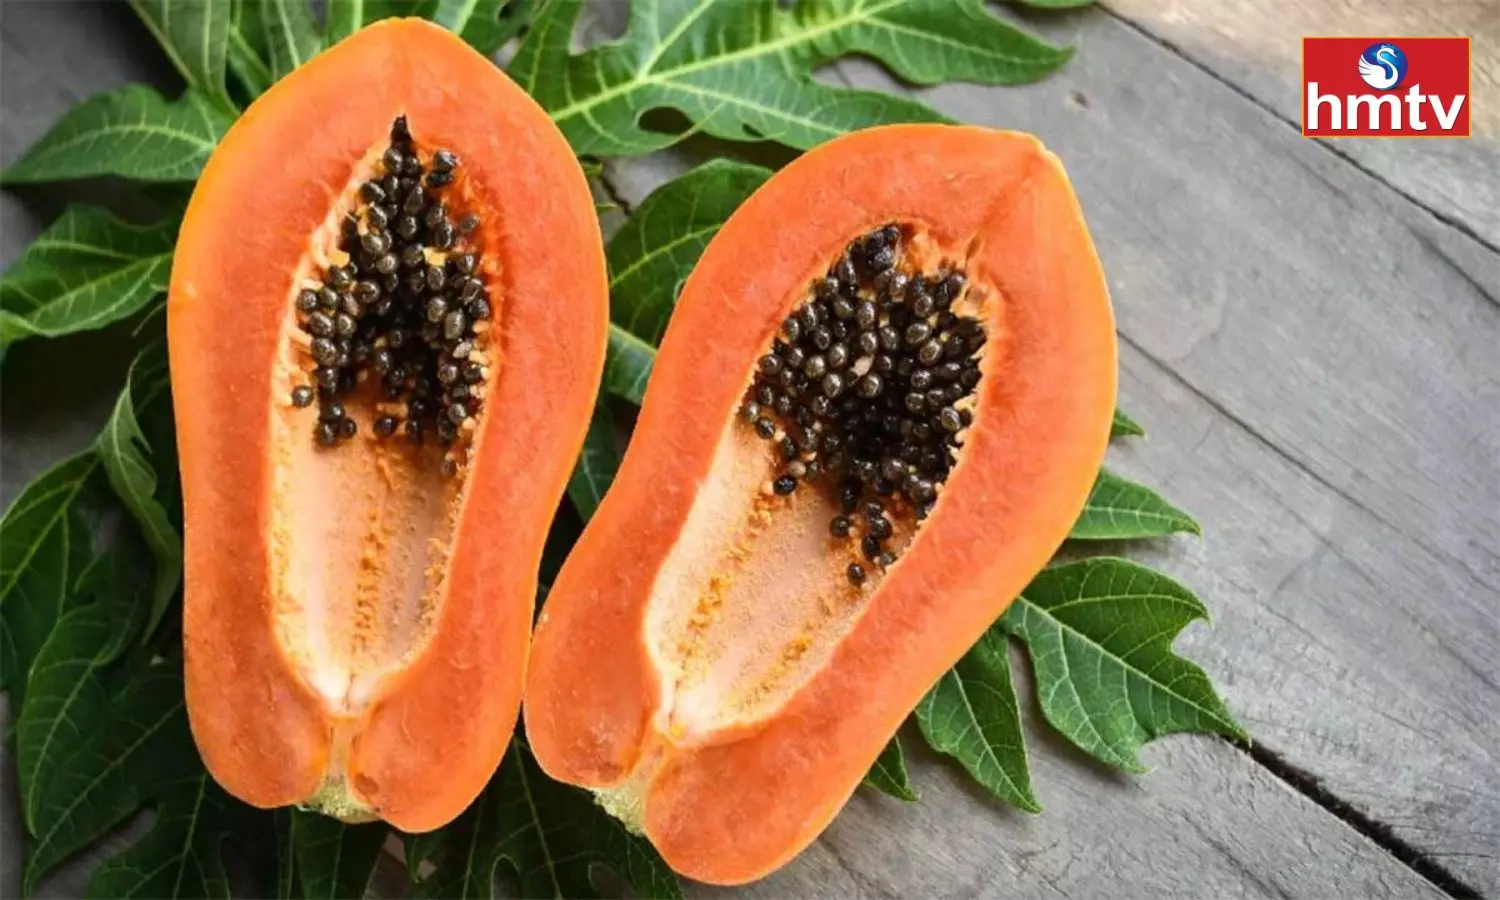 Those Who Have these Problems Should not Eat Papaya Even by Mistake Very Dangerous